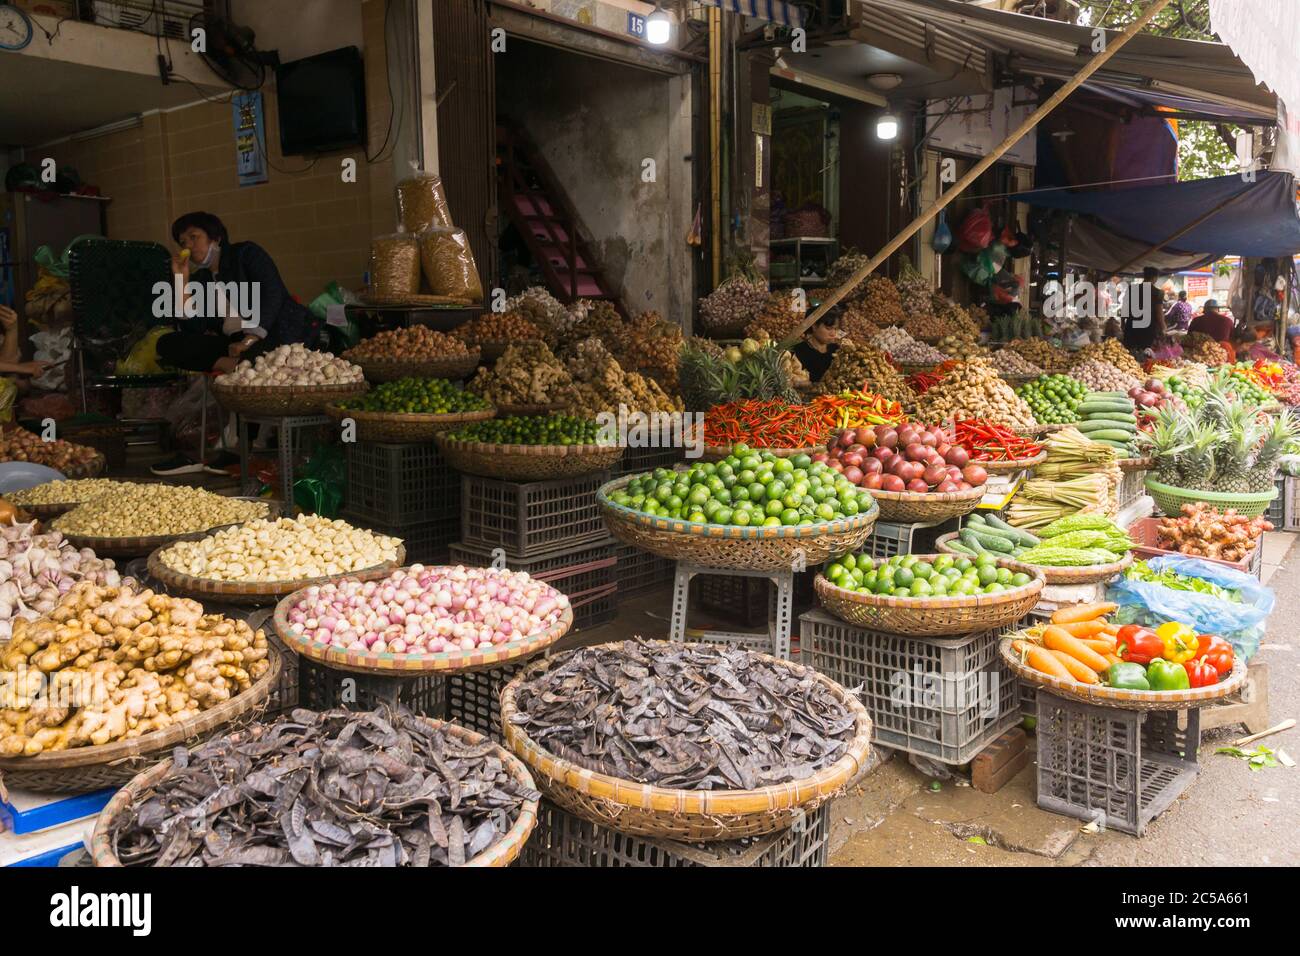 Hanoi Long Bien market - Fresh products sold at the market in Hanoi, Vietnam, Southeast Asia. Stock Photo